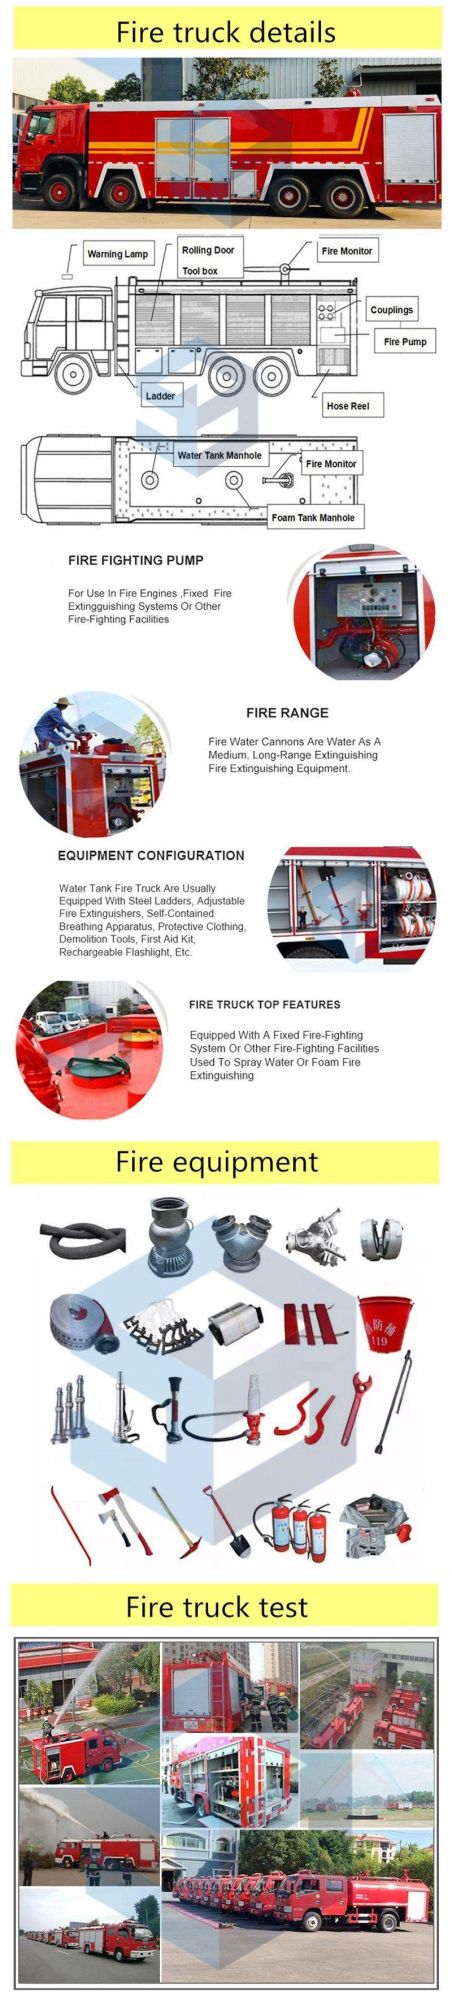 16000 Liters Water Fire Engine Rescue Fighting Truck with Folding Crane